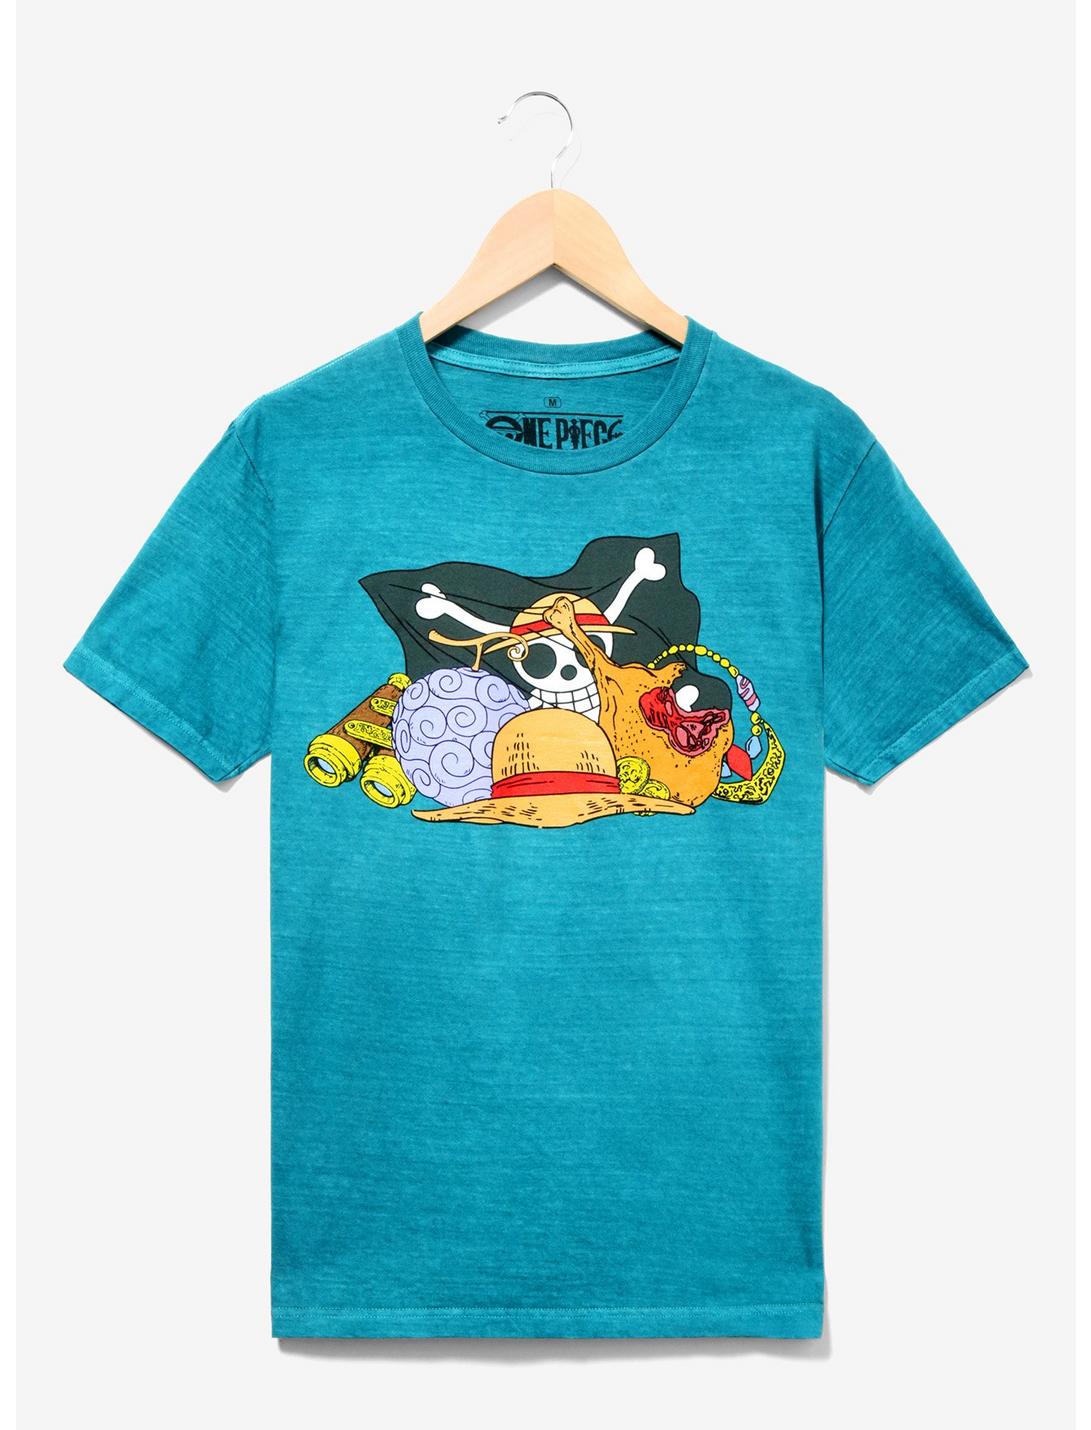 One Piece Straw Hat Crew Icons T-Shirt - BoxLunch Exclusive, TEAL, hi-res